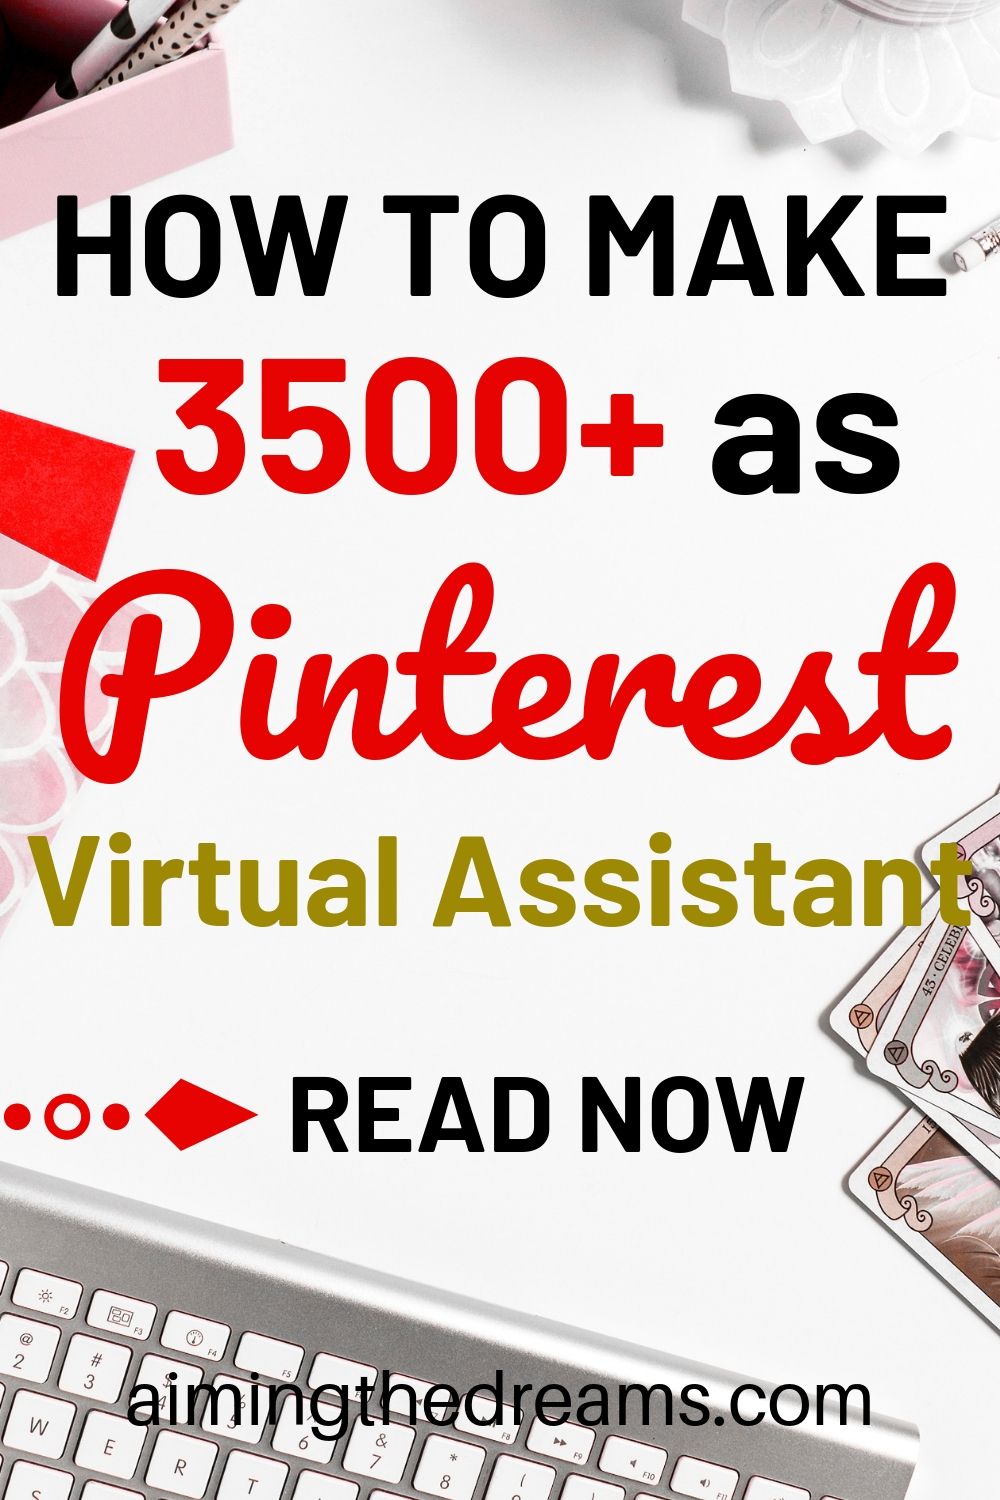 How to become a Pinterest VA and earn full time income